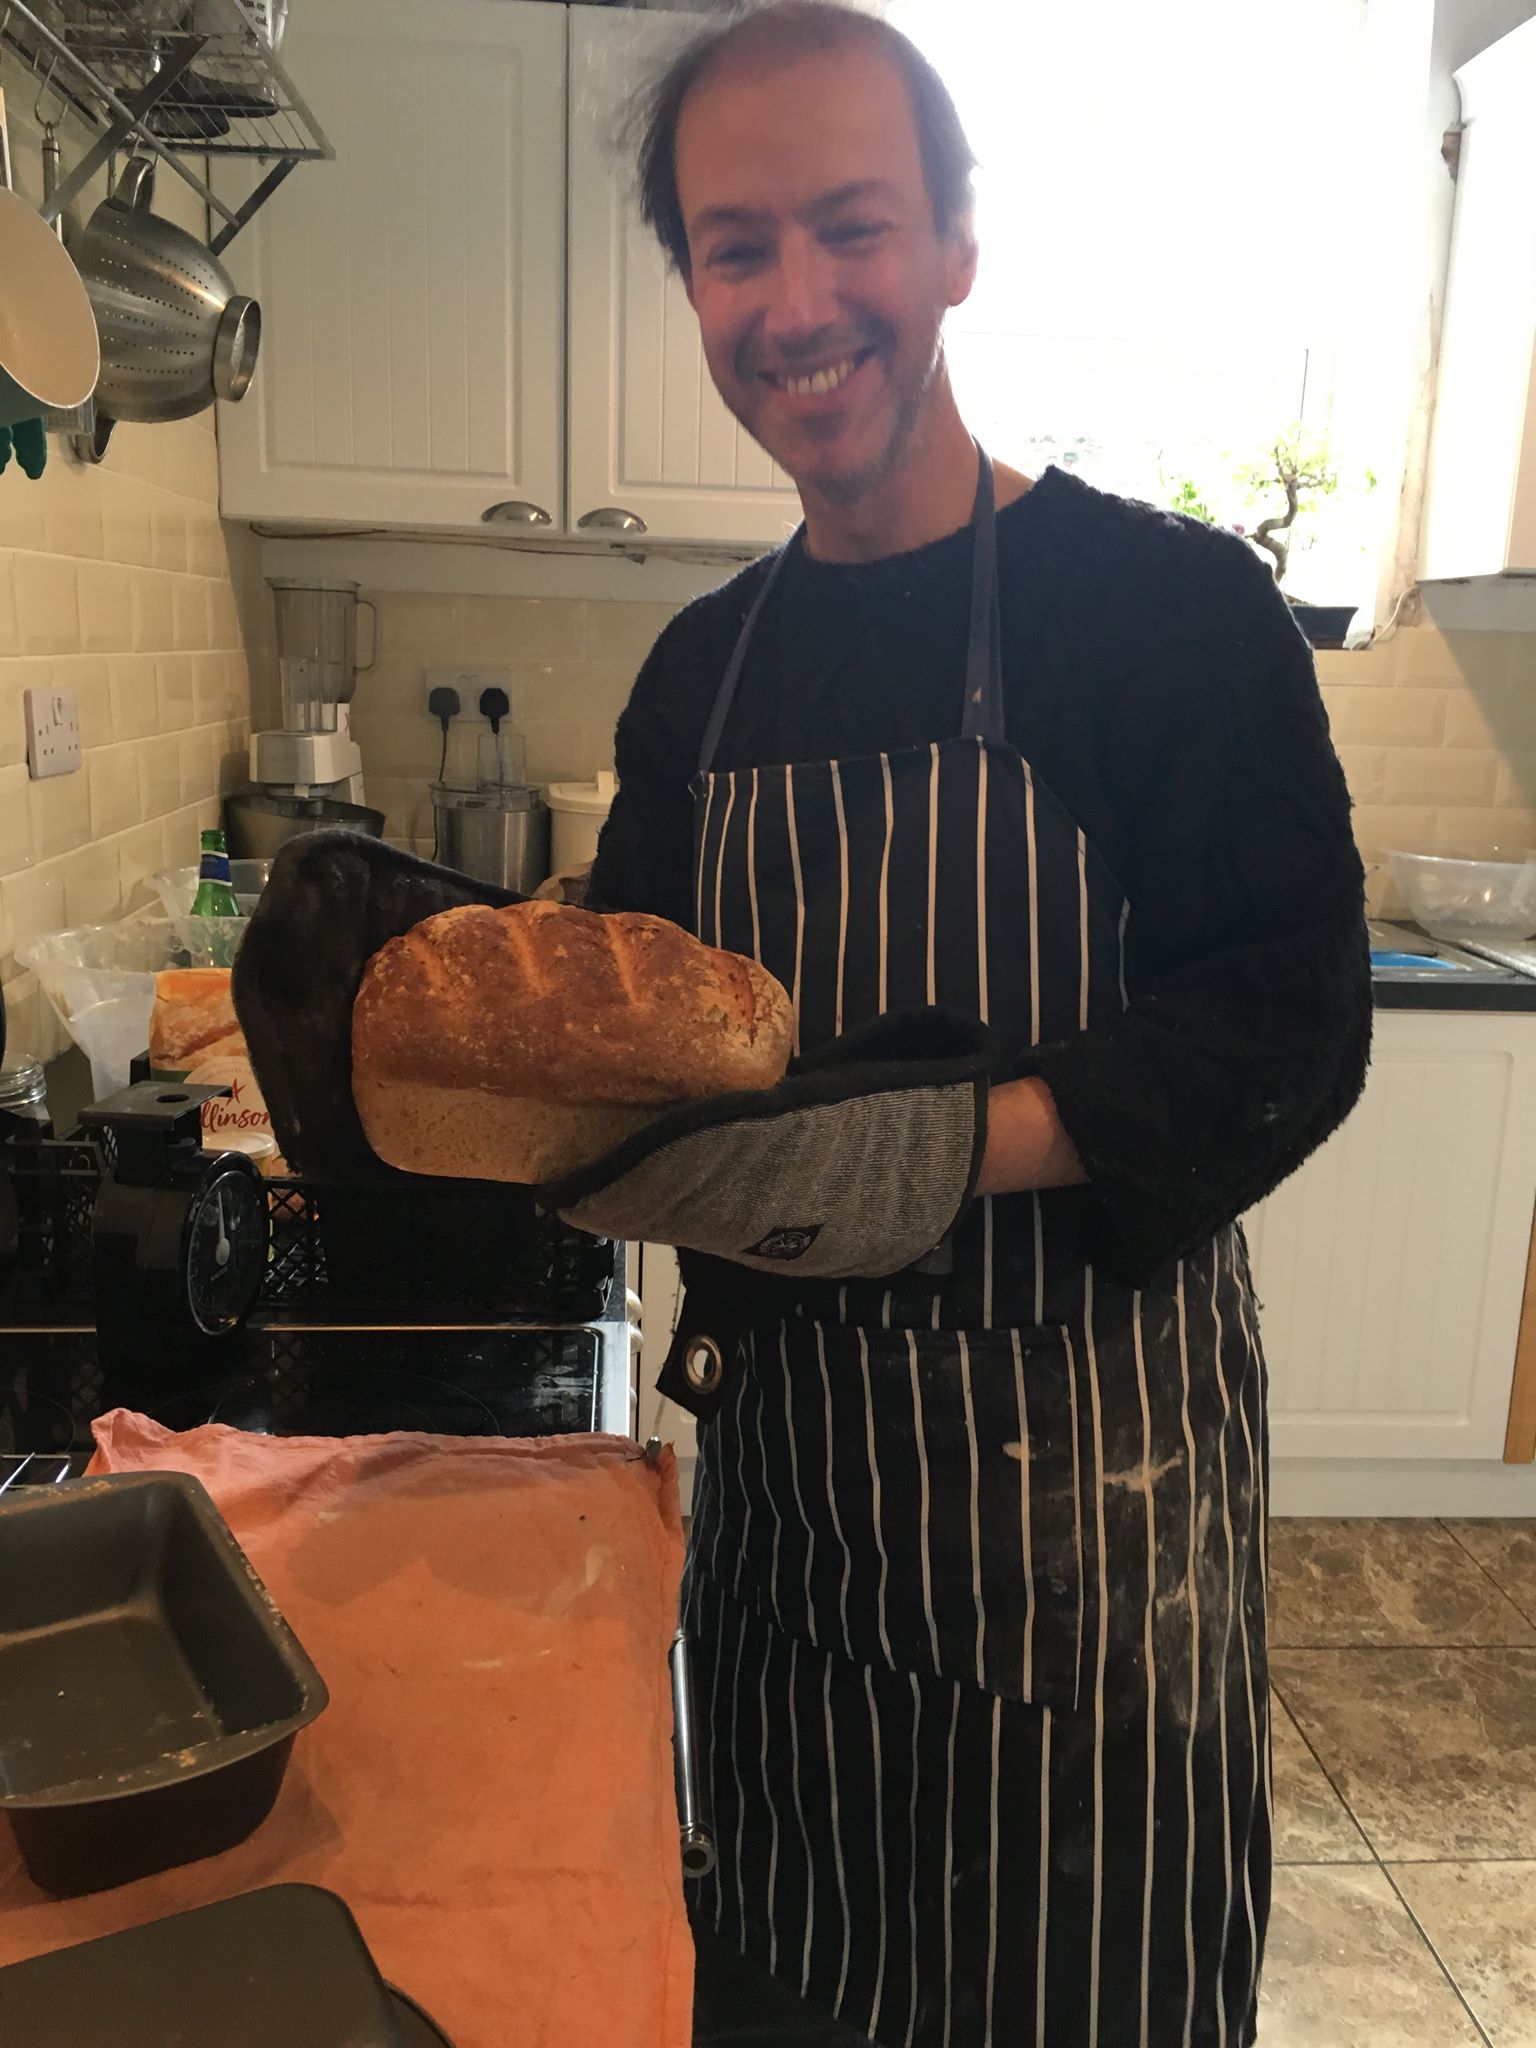 Philip getting bread out of the oven